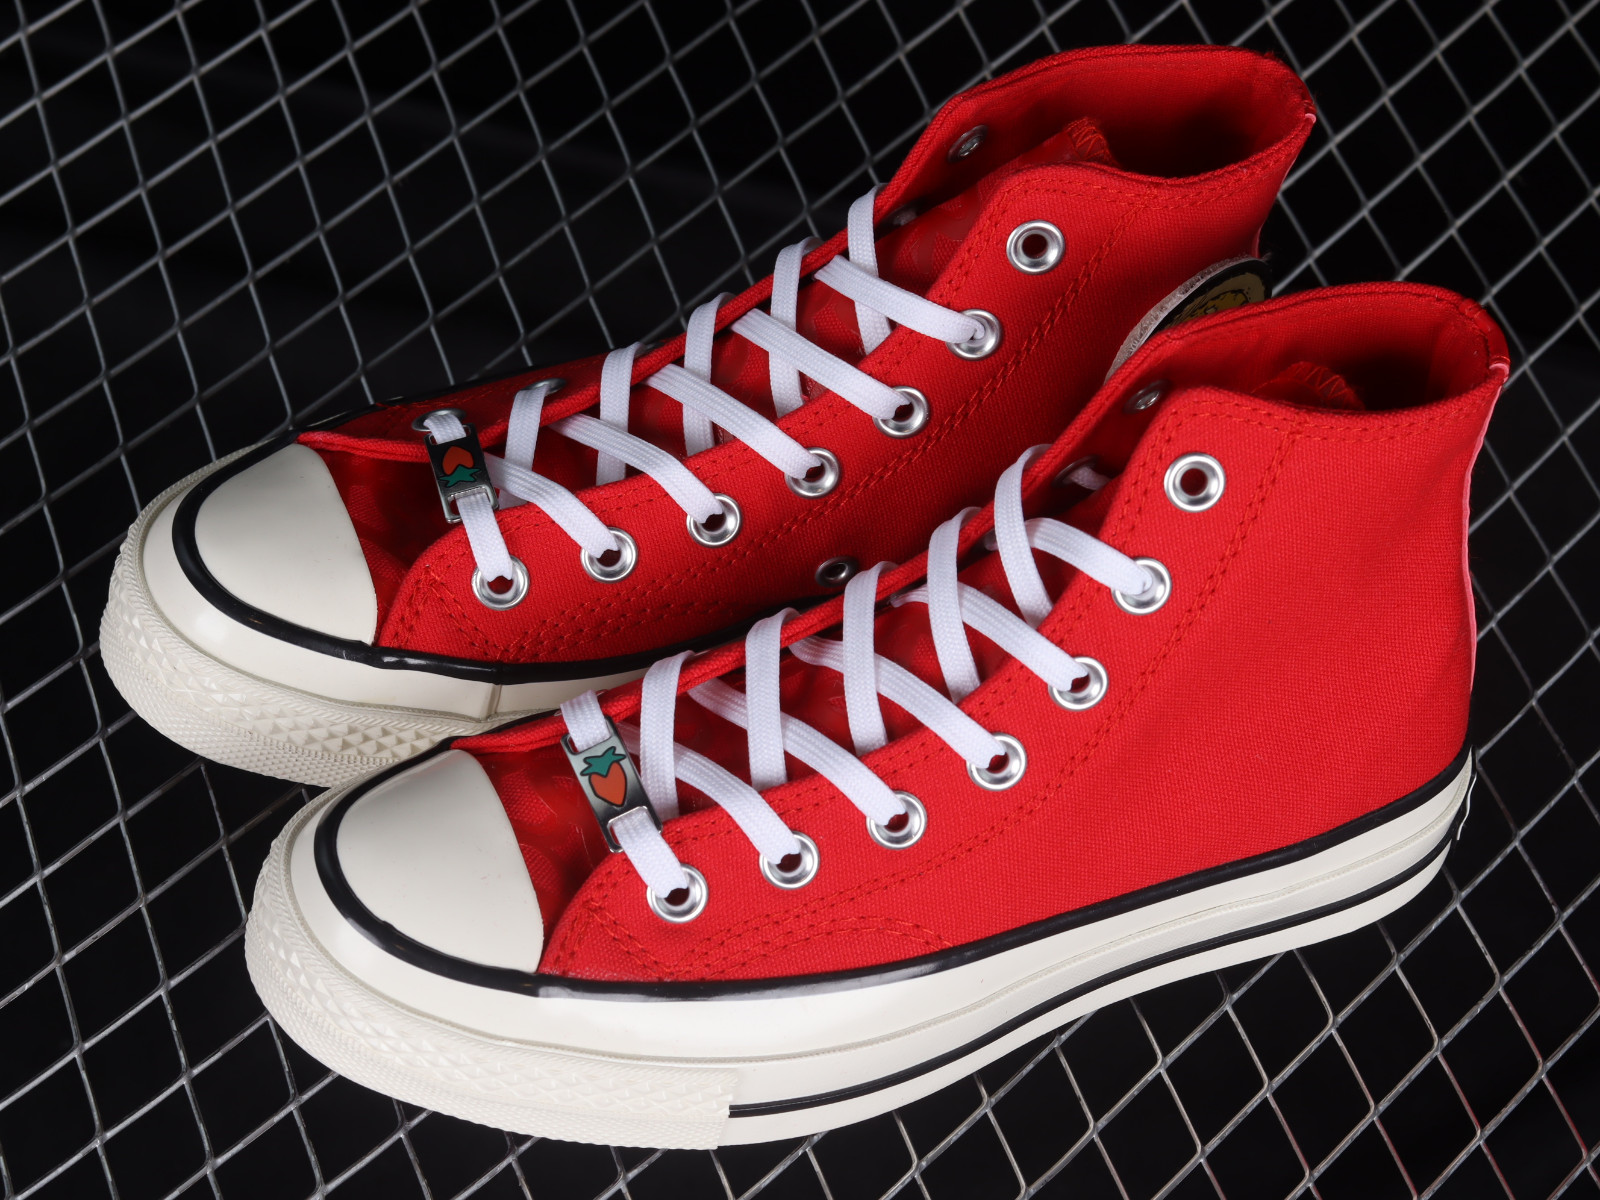 Converse Chuck Taylor All Star 1970s China New Year Red Black A05266C - GmarShops